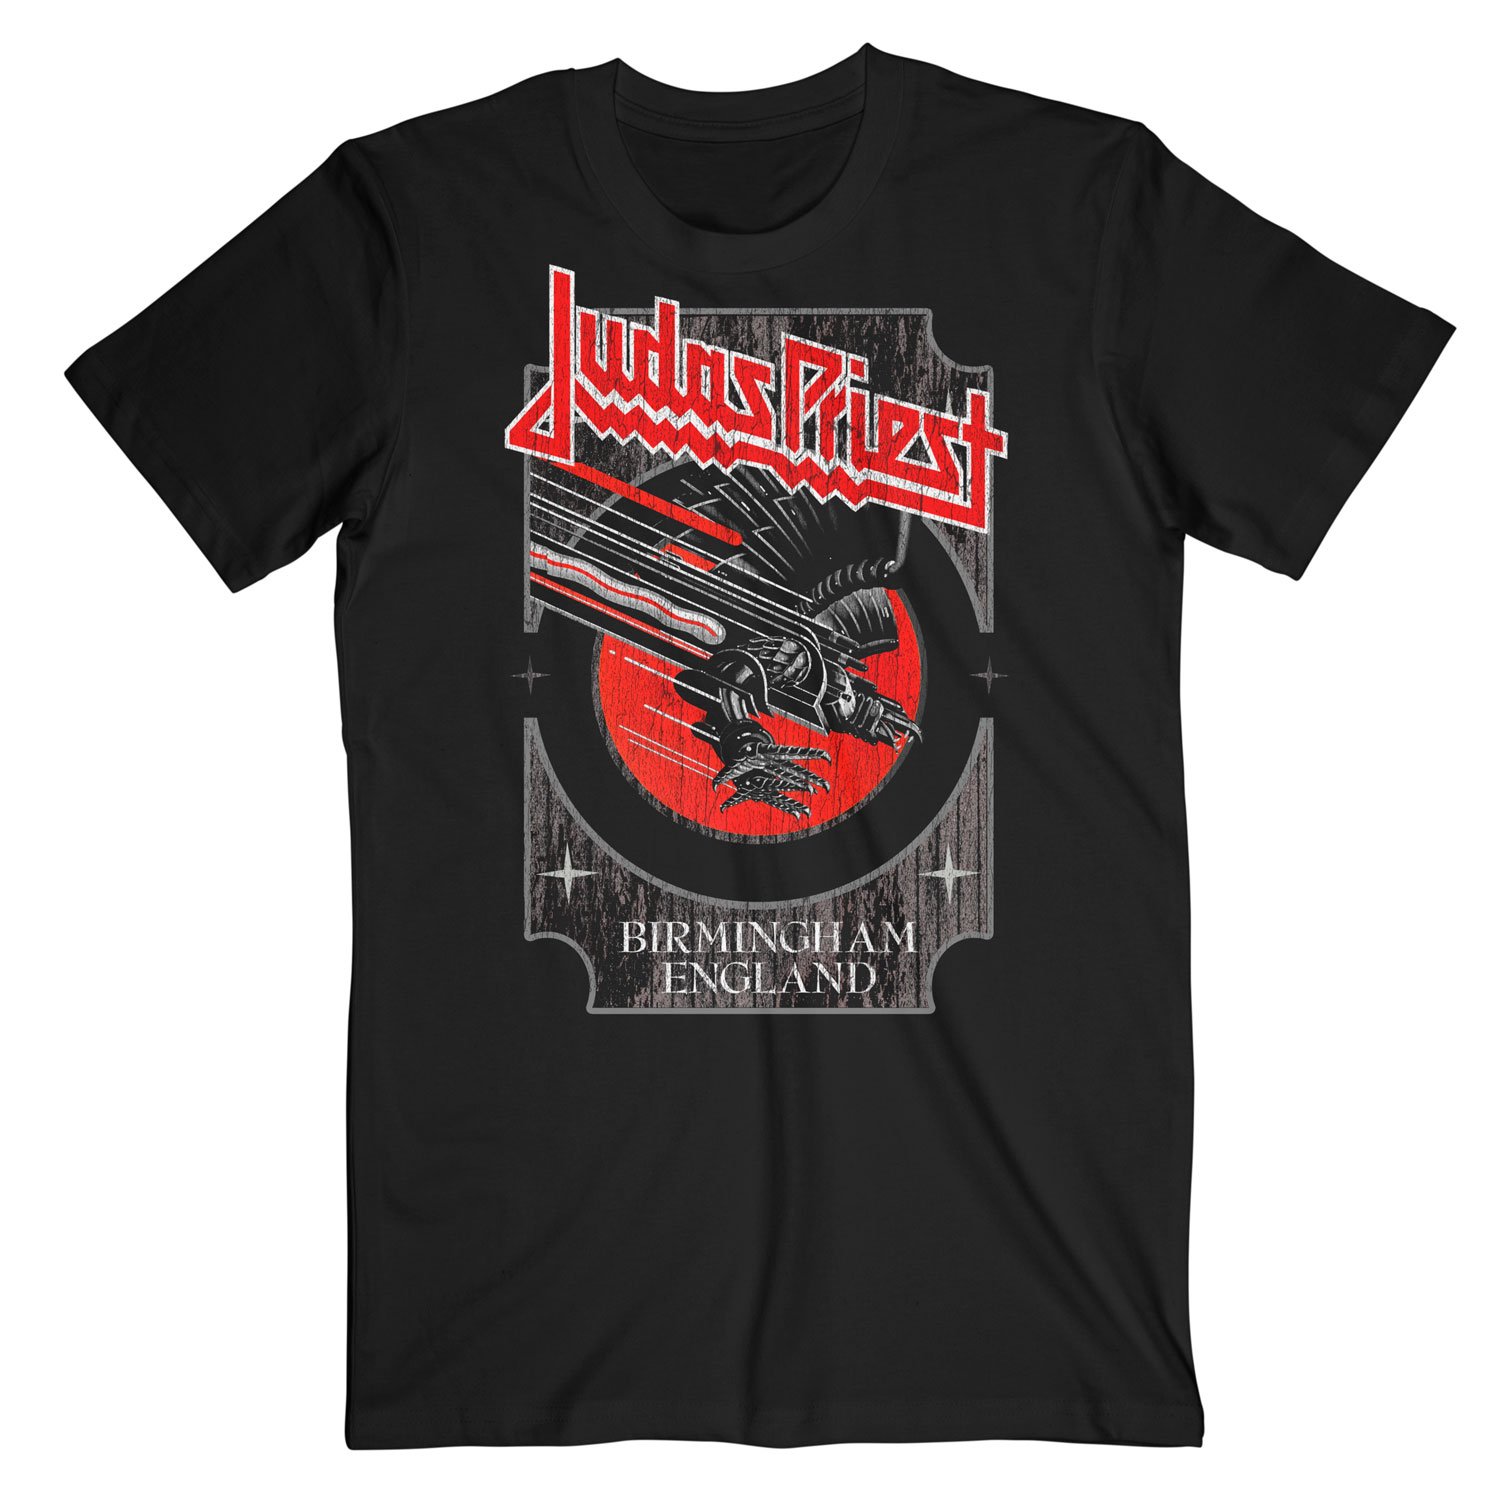 Judas Priest - Silver And Red Vengeance T-Shirt